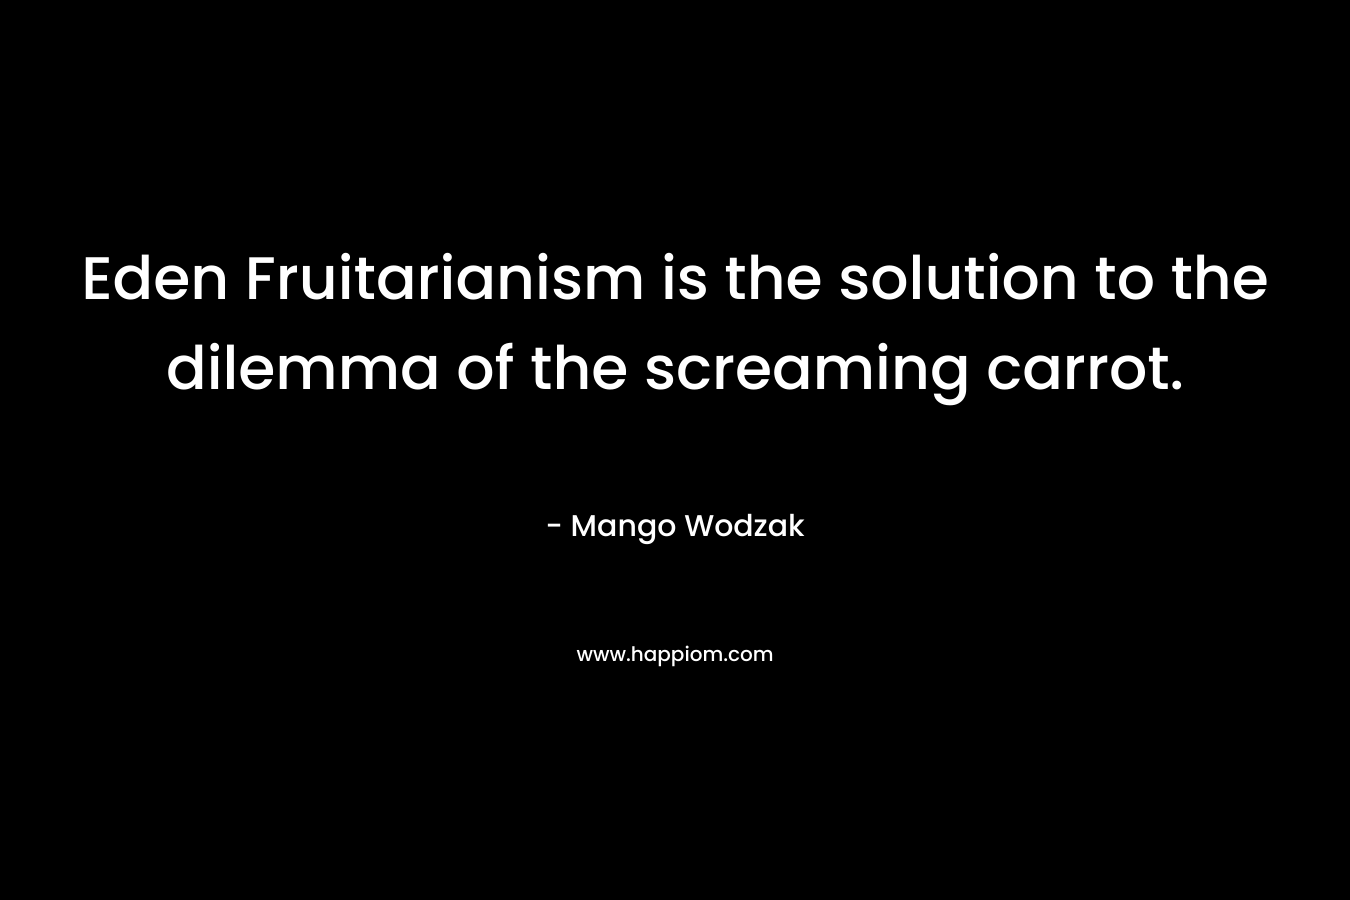 Eden Fruitarianism is the solution to the dilemma of the screaming carrot. – Mango Wodzak